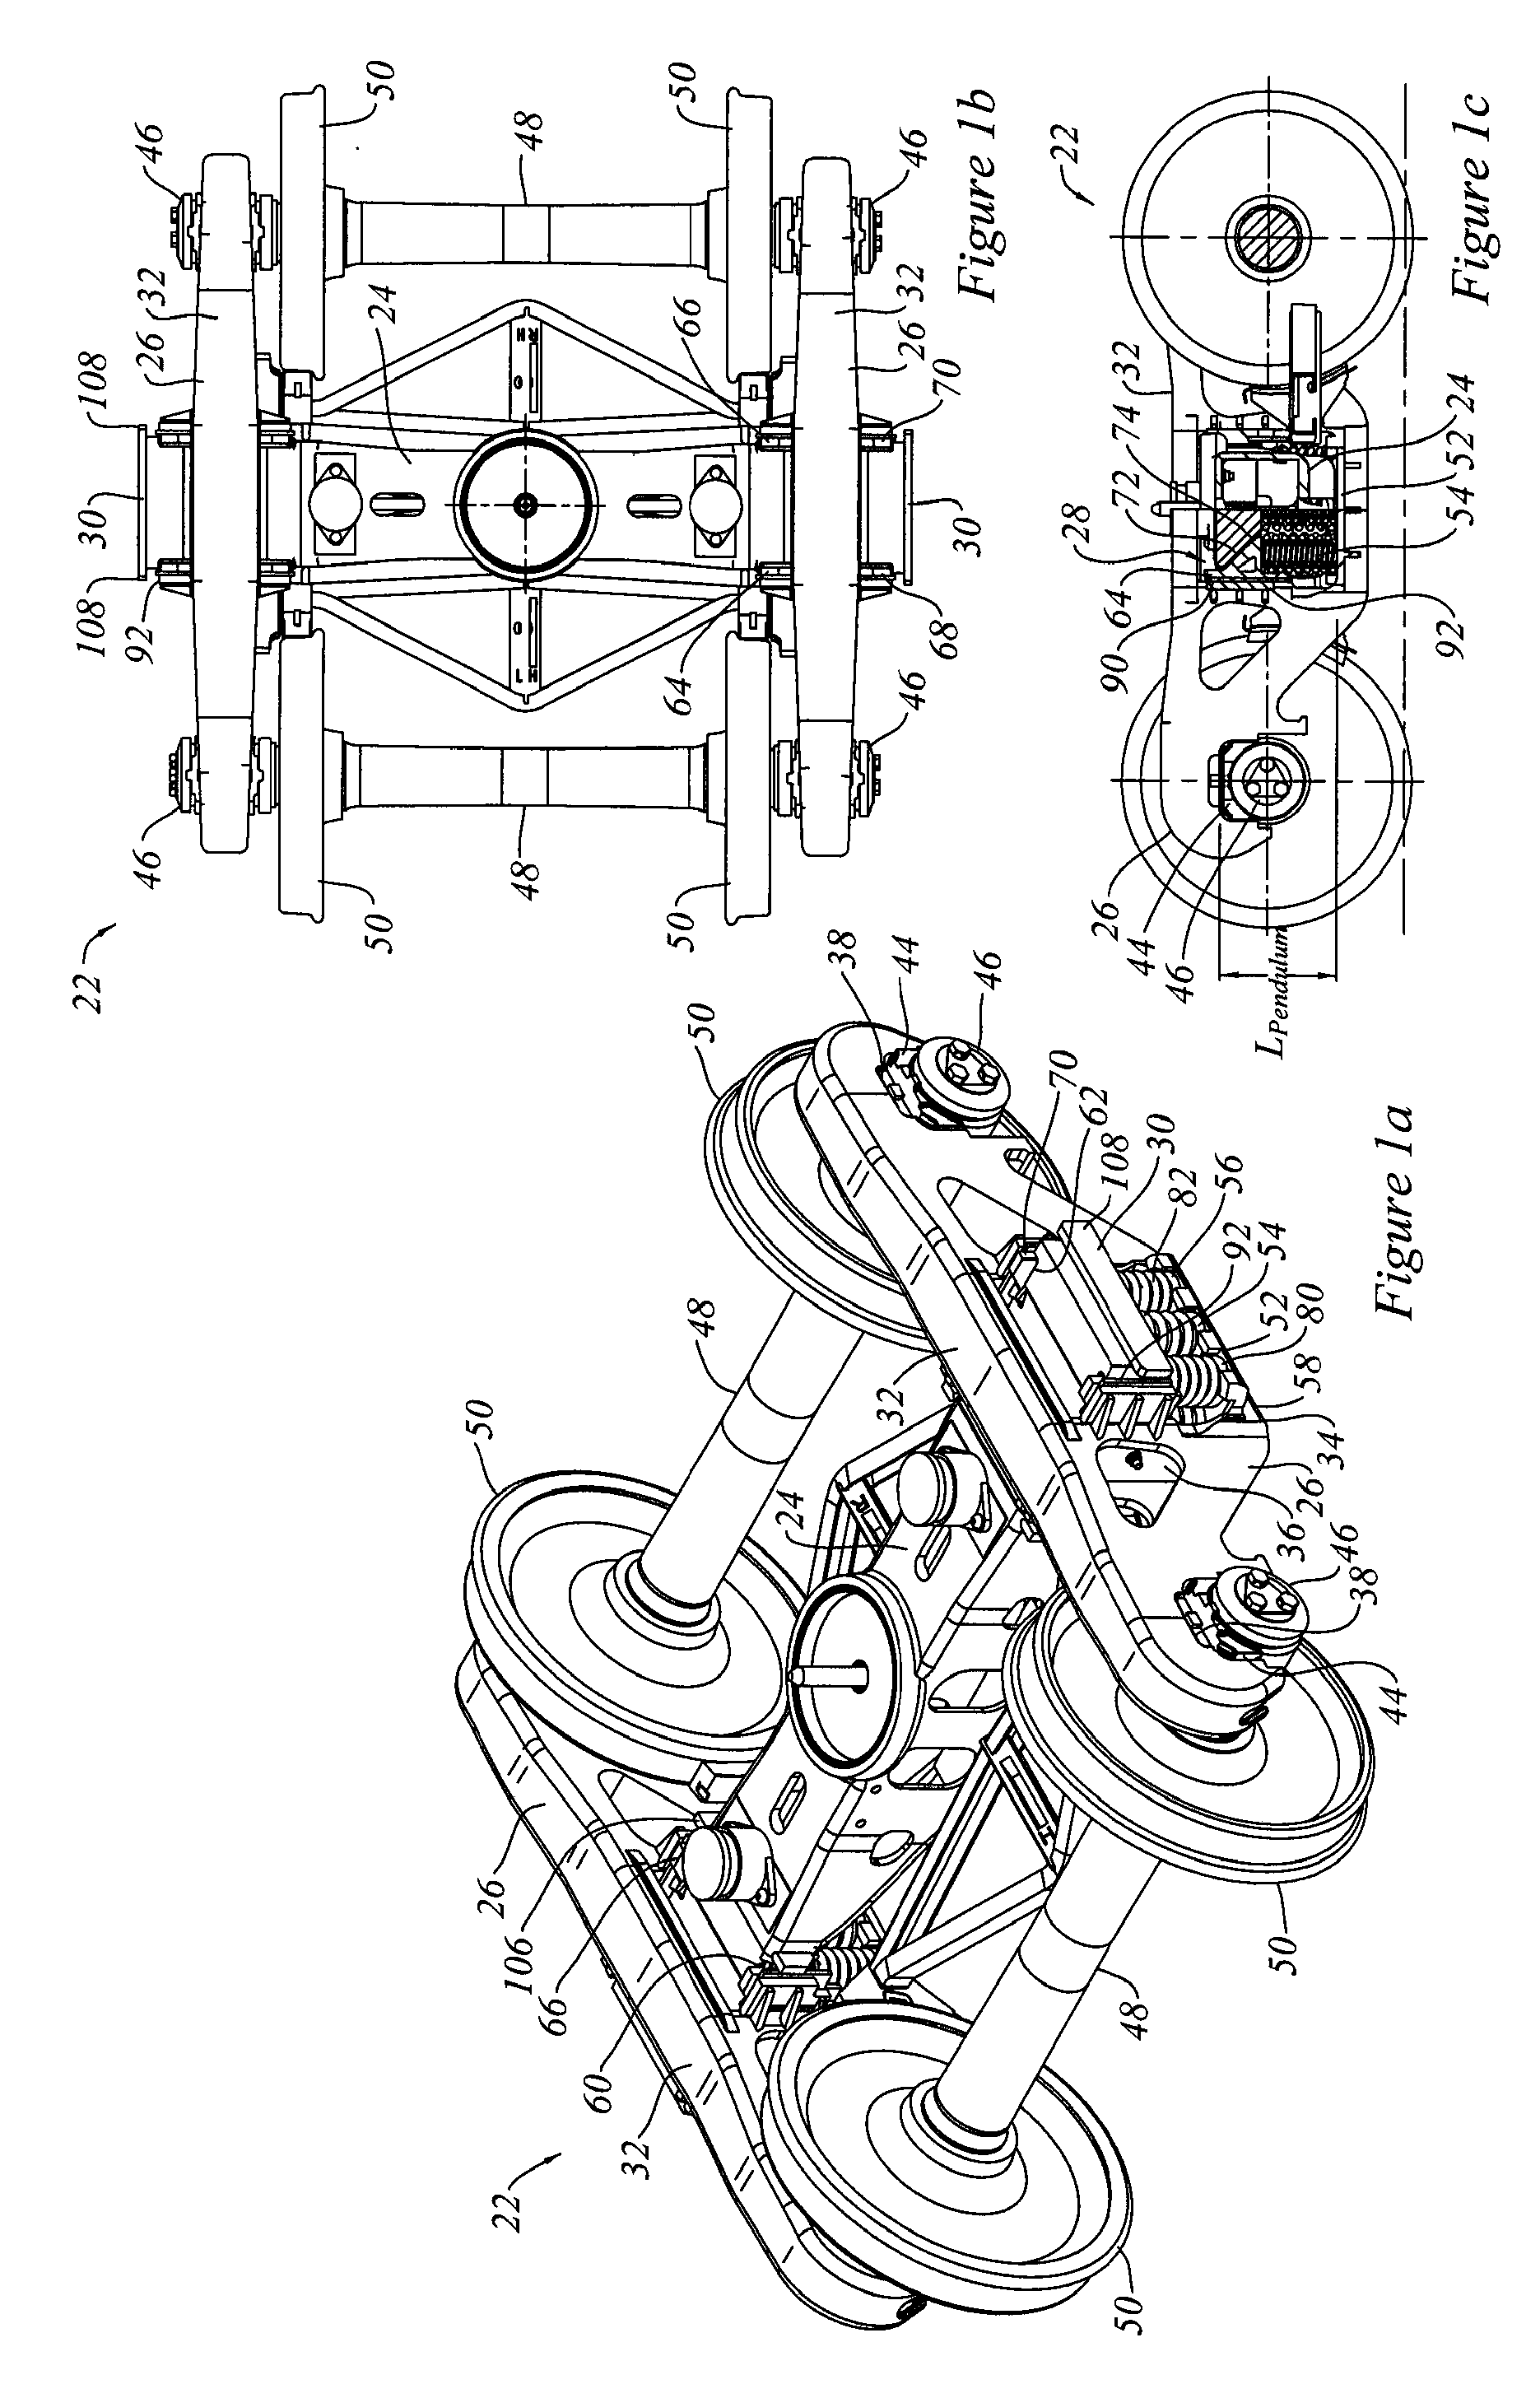 Rail road car and bearing adapter fittings therefor